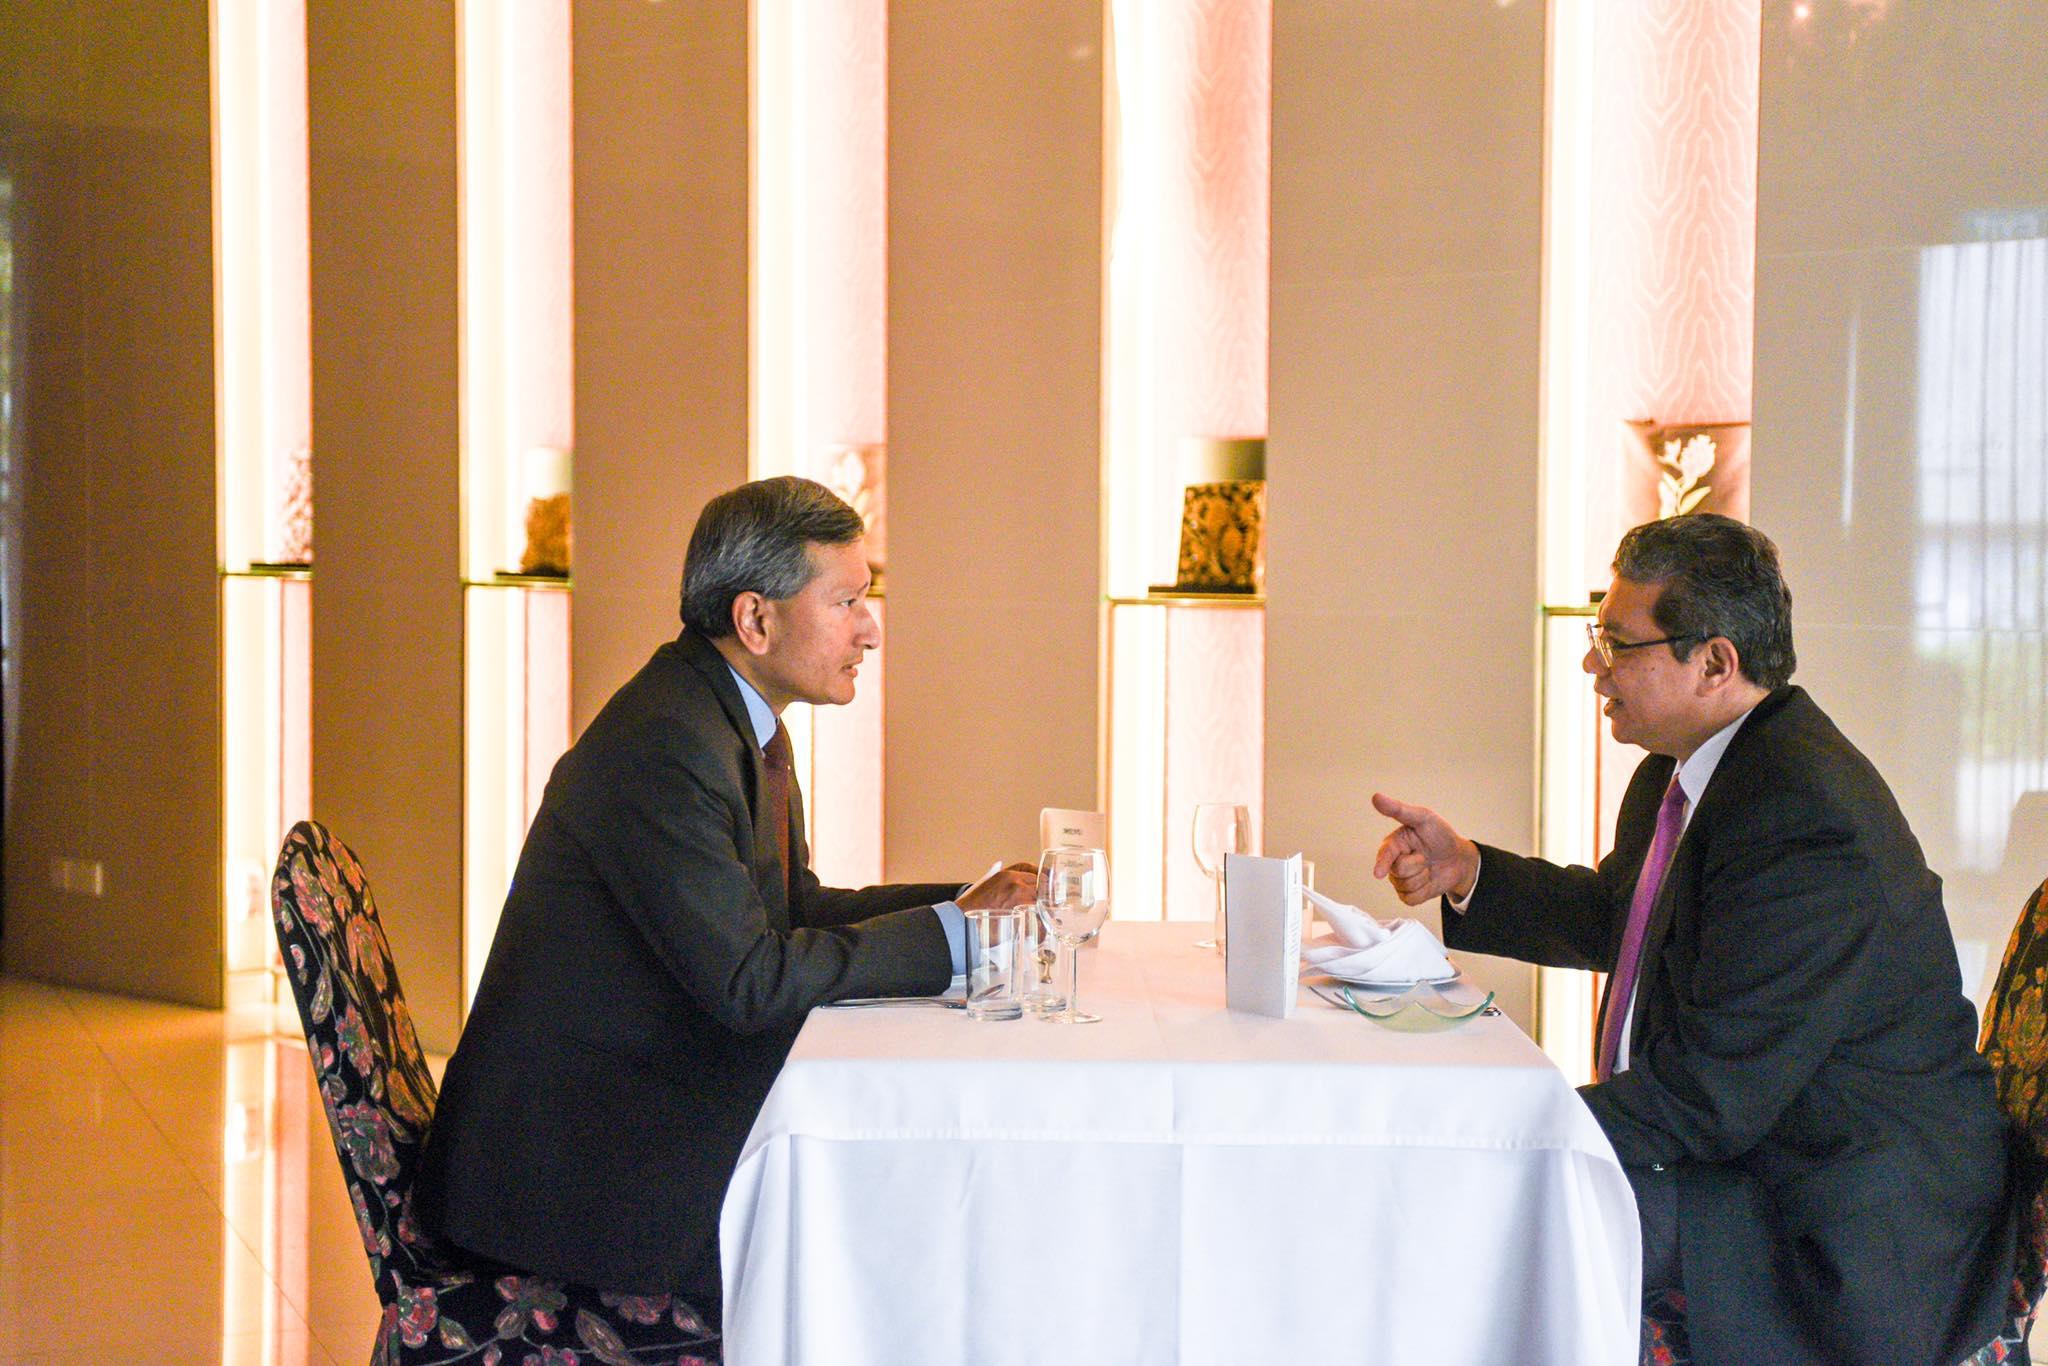 Foreign Minister Saifuddin Abdullah (right), seen in this file picture with his Singapore counterpart Vivian Balakrishnan, has written on behalf of Nagaenthran K Dharmalingam, a Malaysian on death row in Singapore whose pending execution has attracted international attention. Photo: Facebook